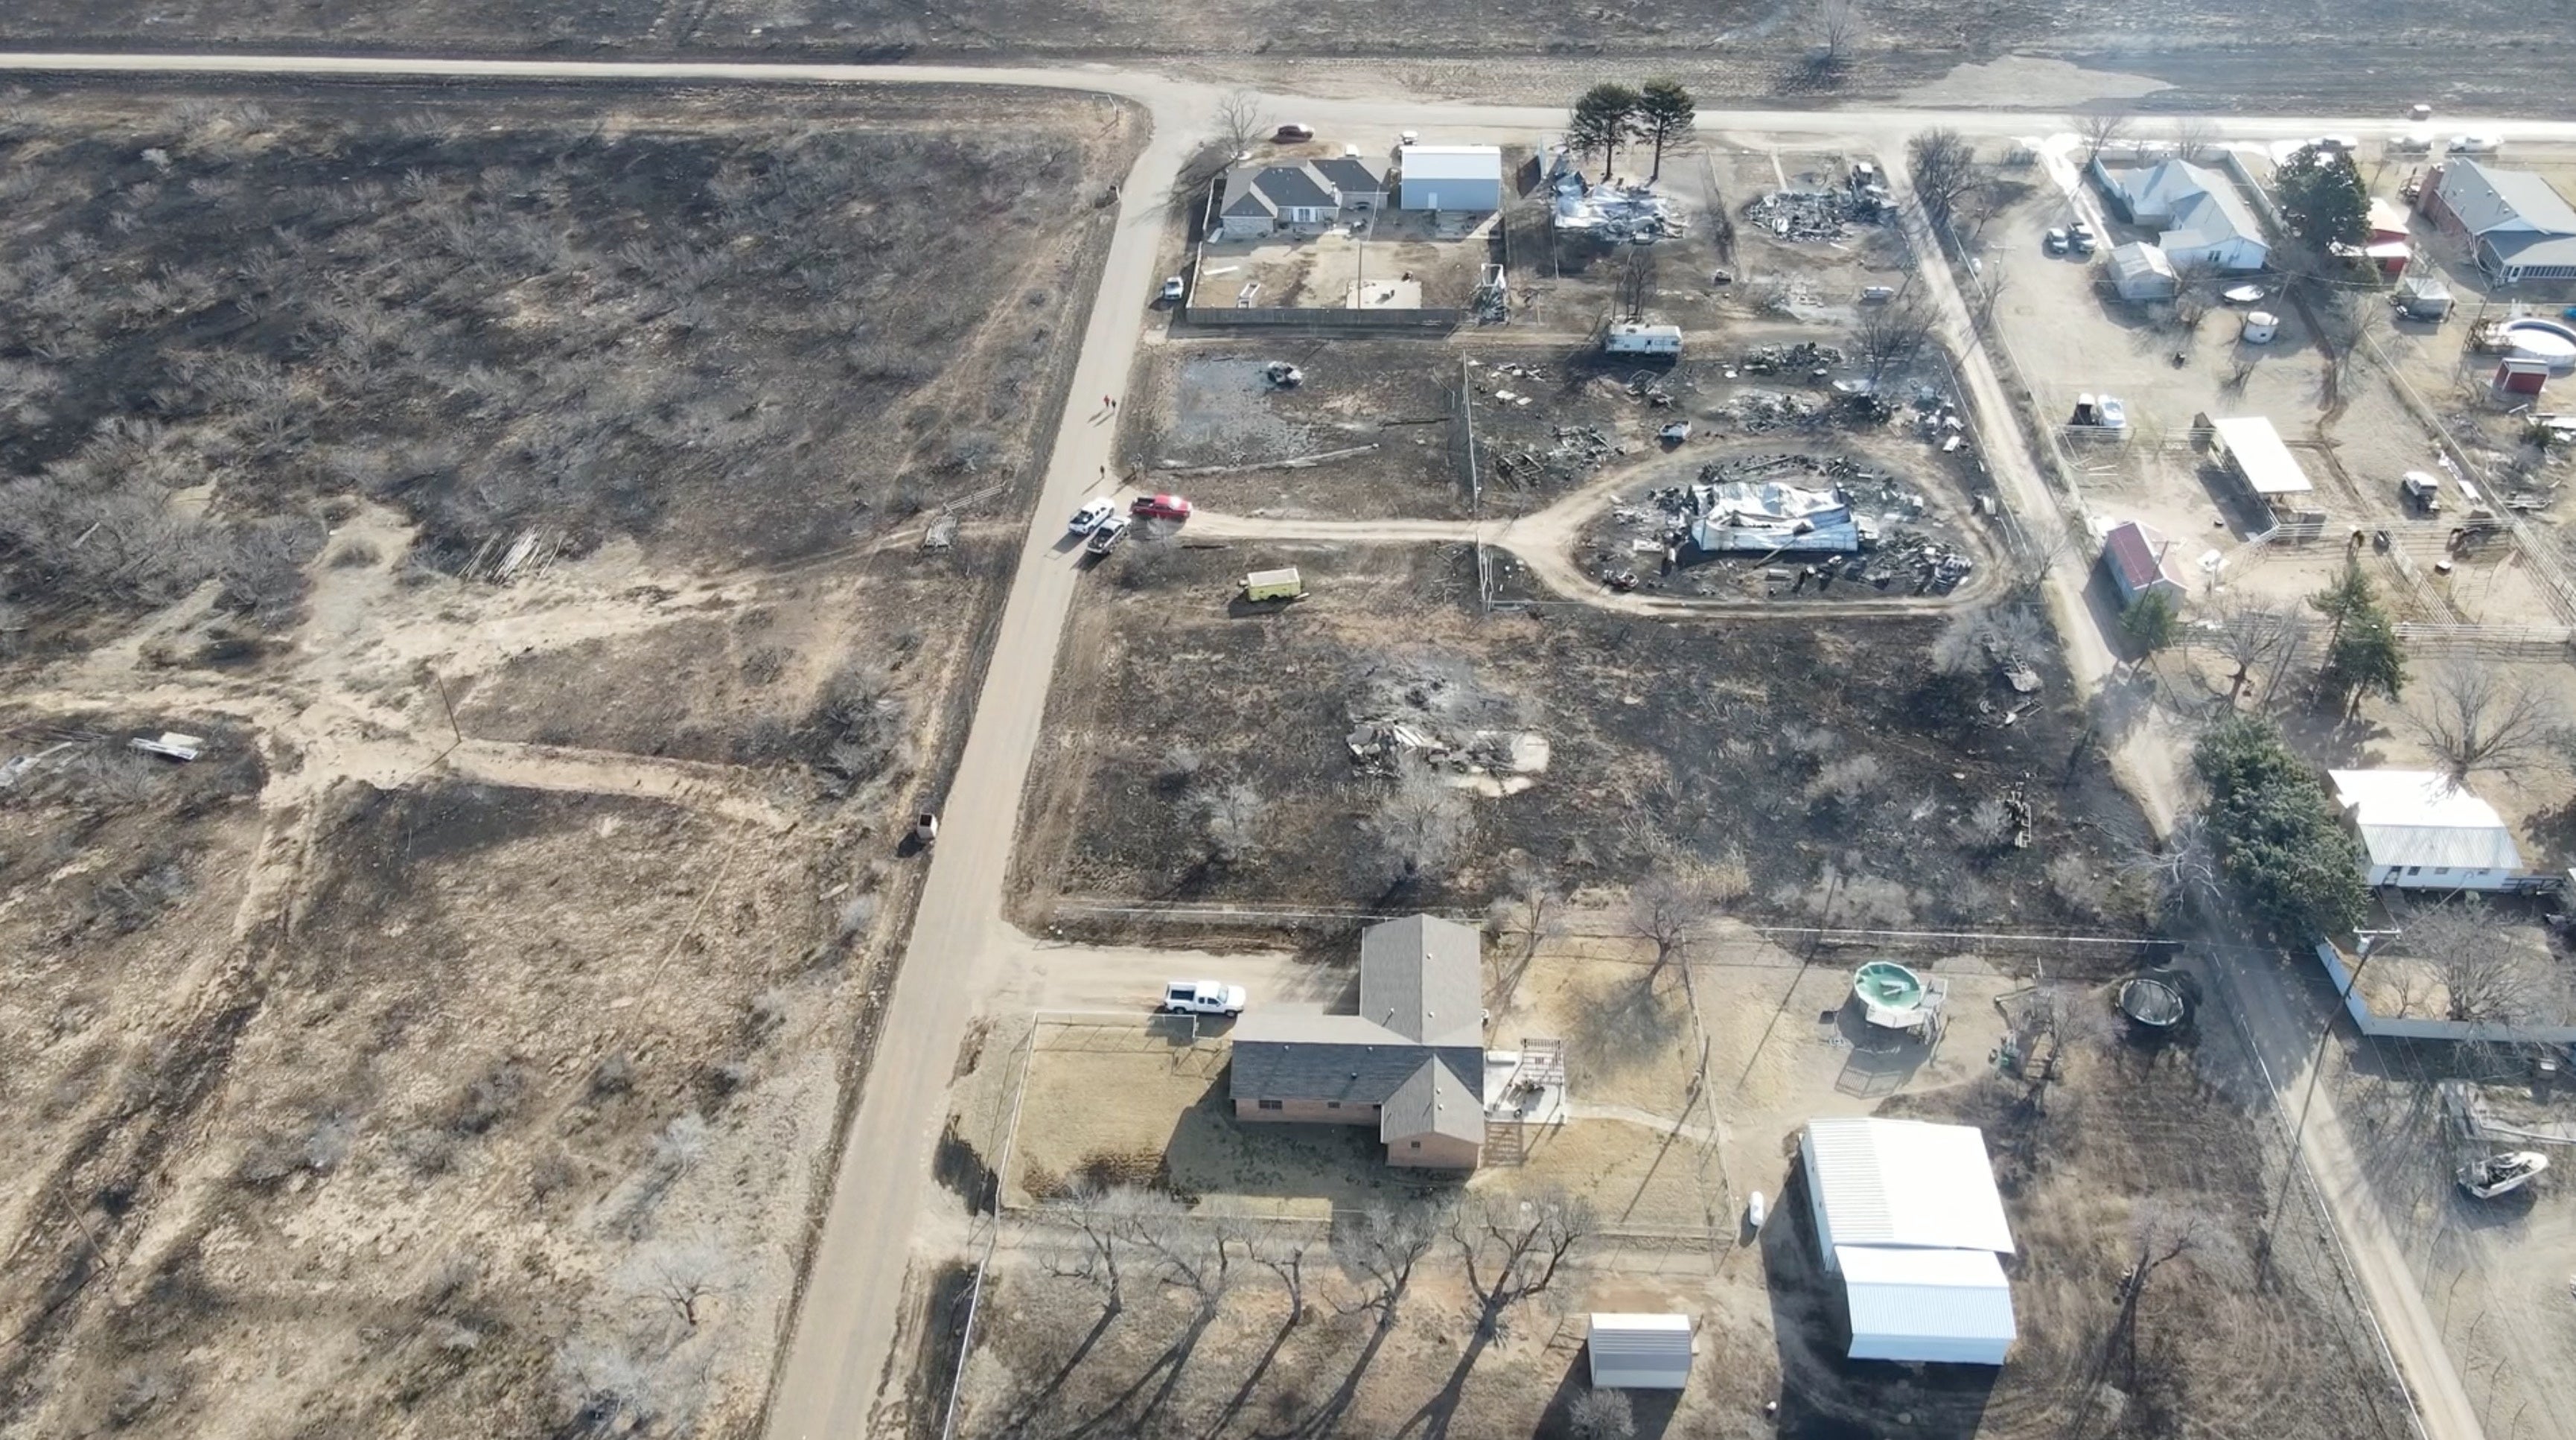 Aerial footage of Stinnett, Texas after wildfires ravaged the town